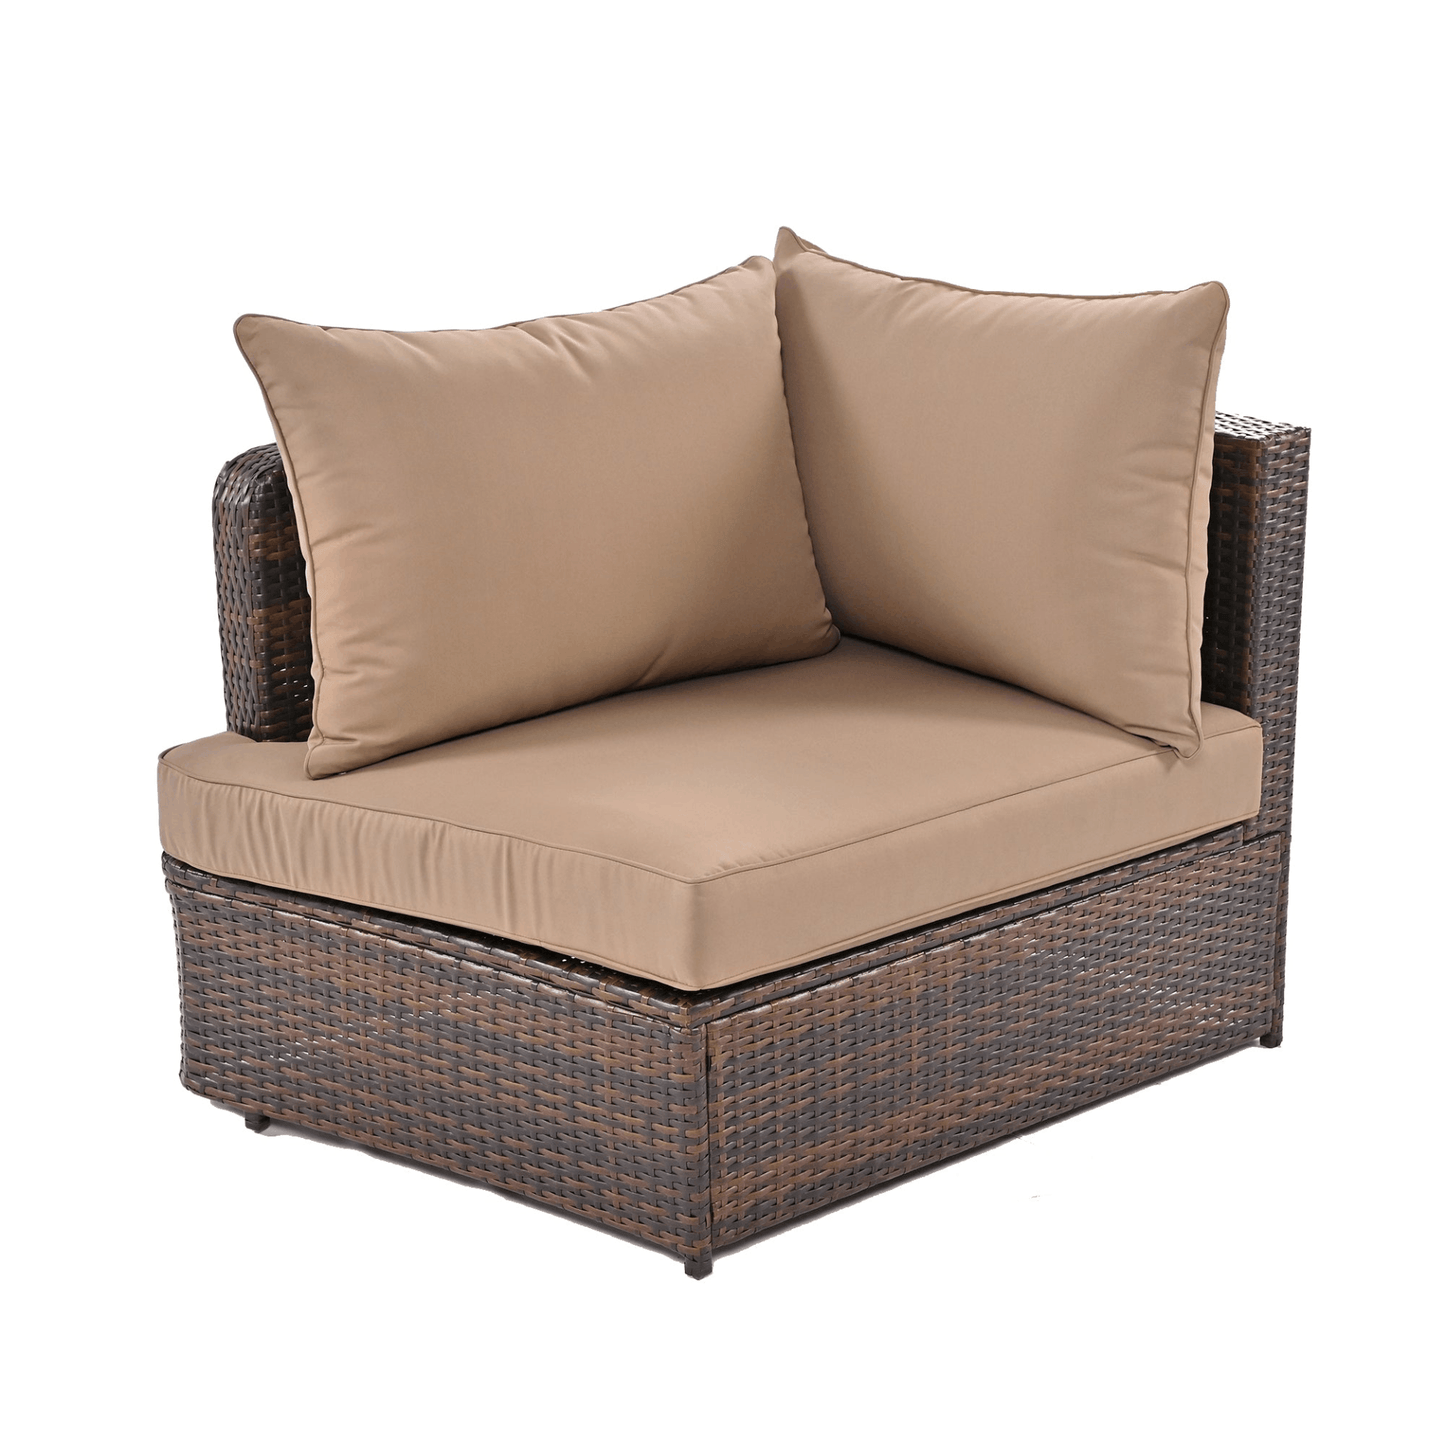 6-Piece Patio Outdoor Conversation Round Sofa Set, PE Wicker Rattan Separate Seating Group with Coffee Table, Brown 